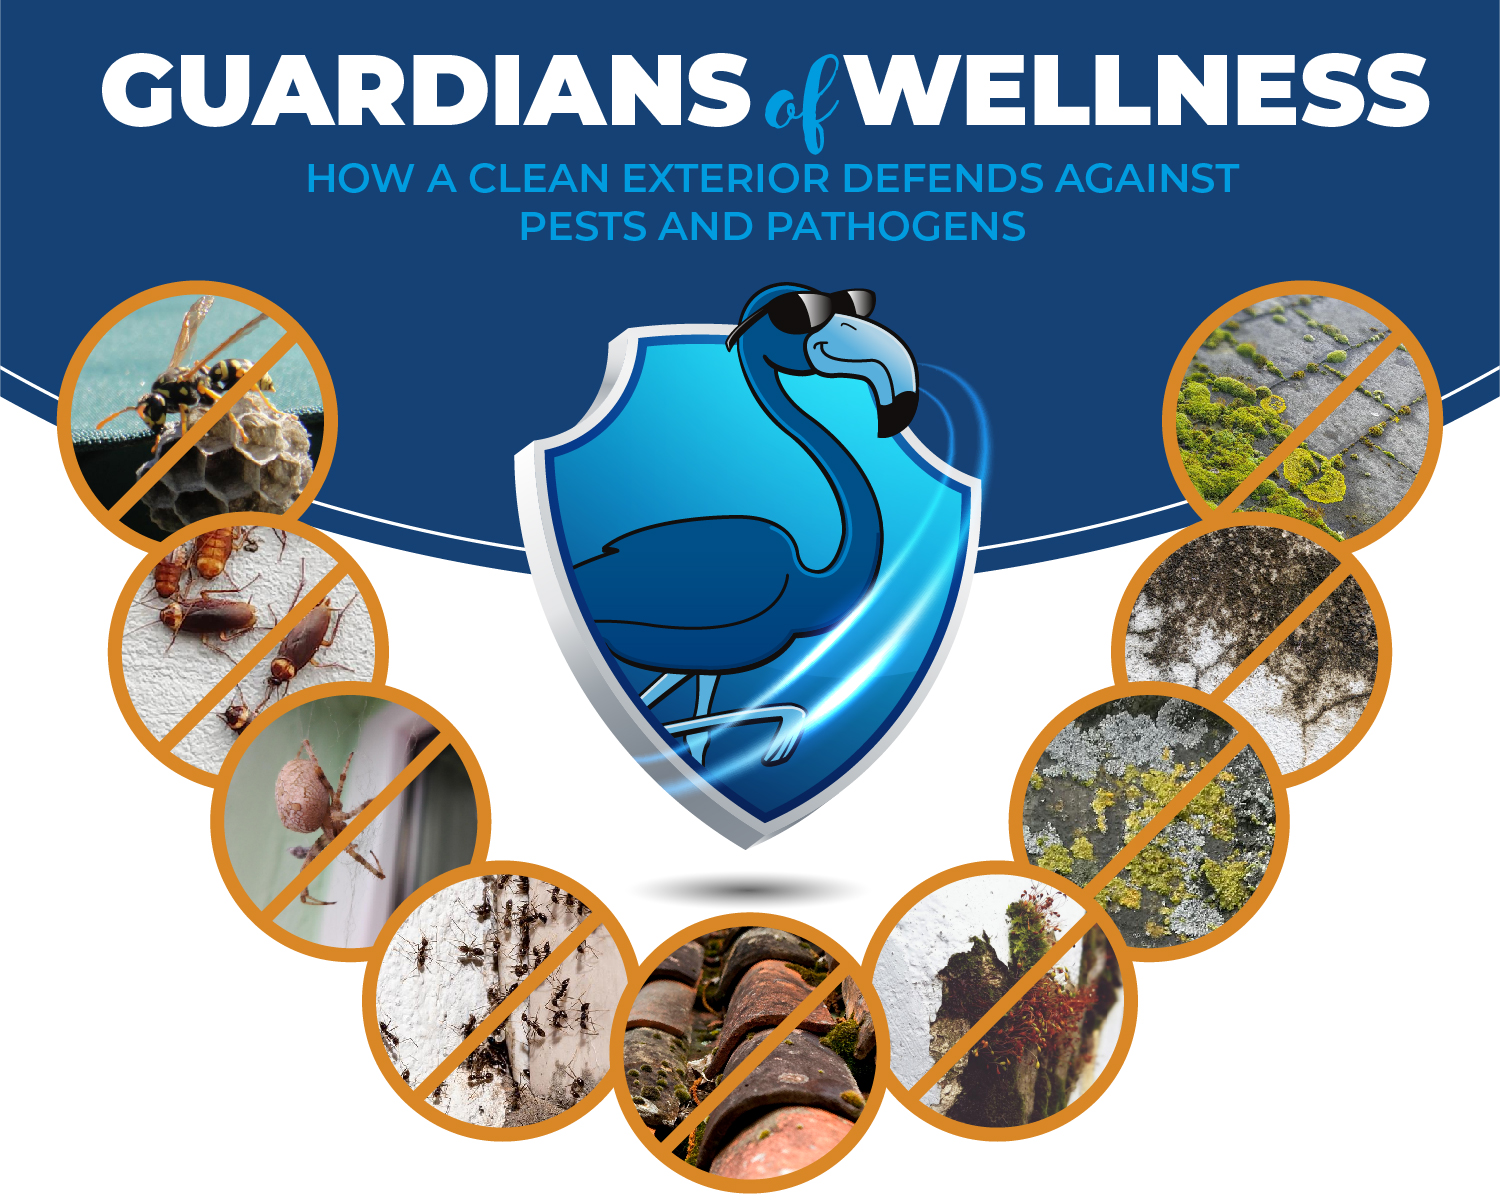 Guardians of Wellness: How a Clean Exterior Defends Against Pests and Pathogens